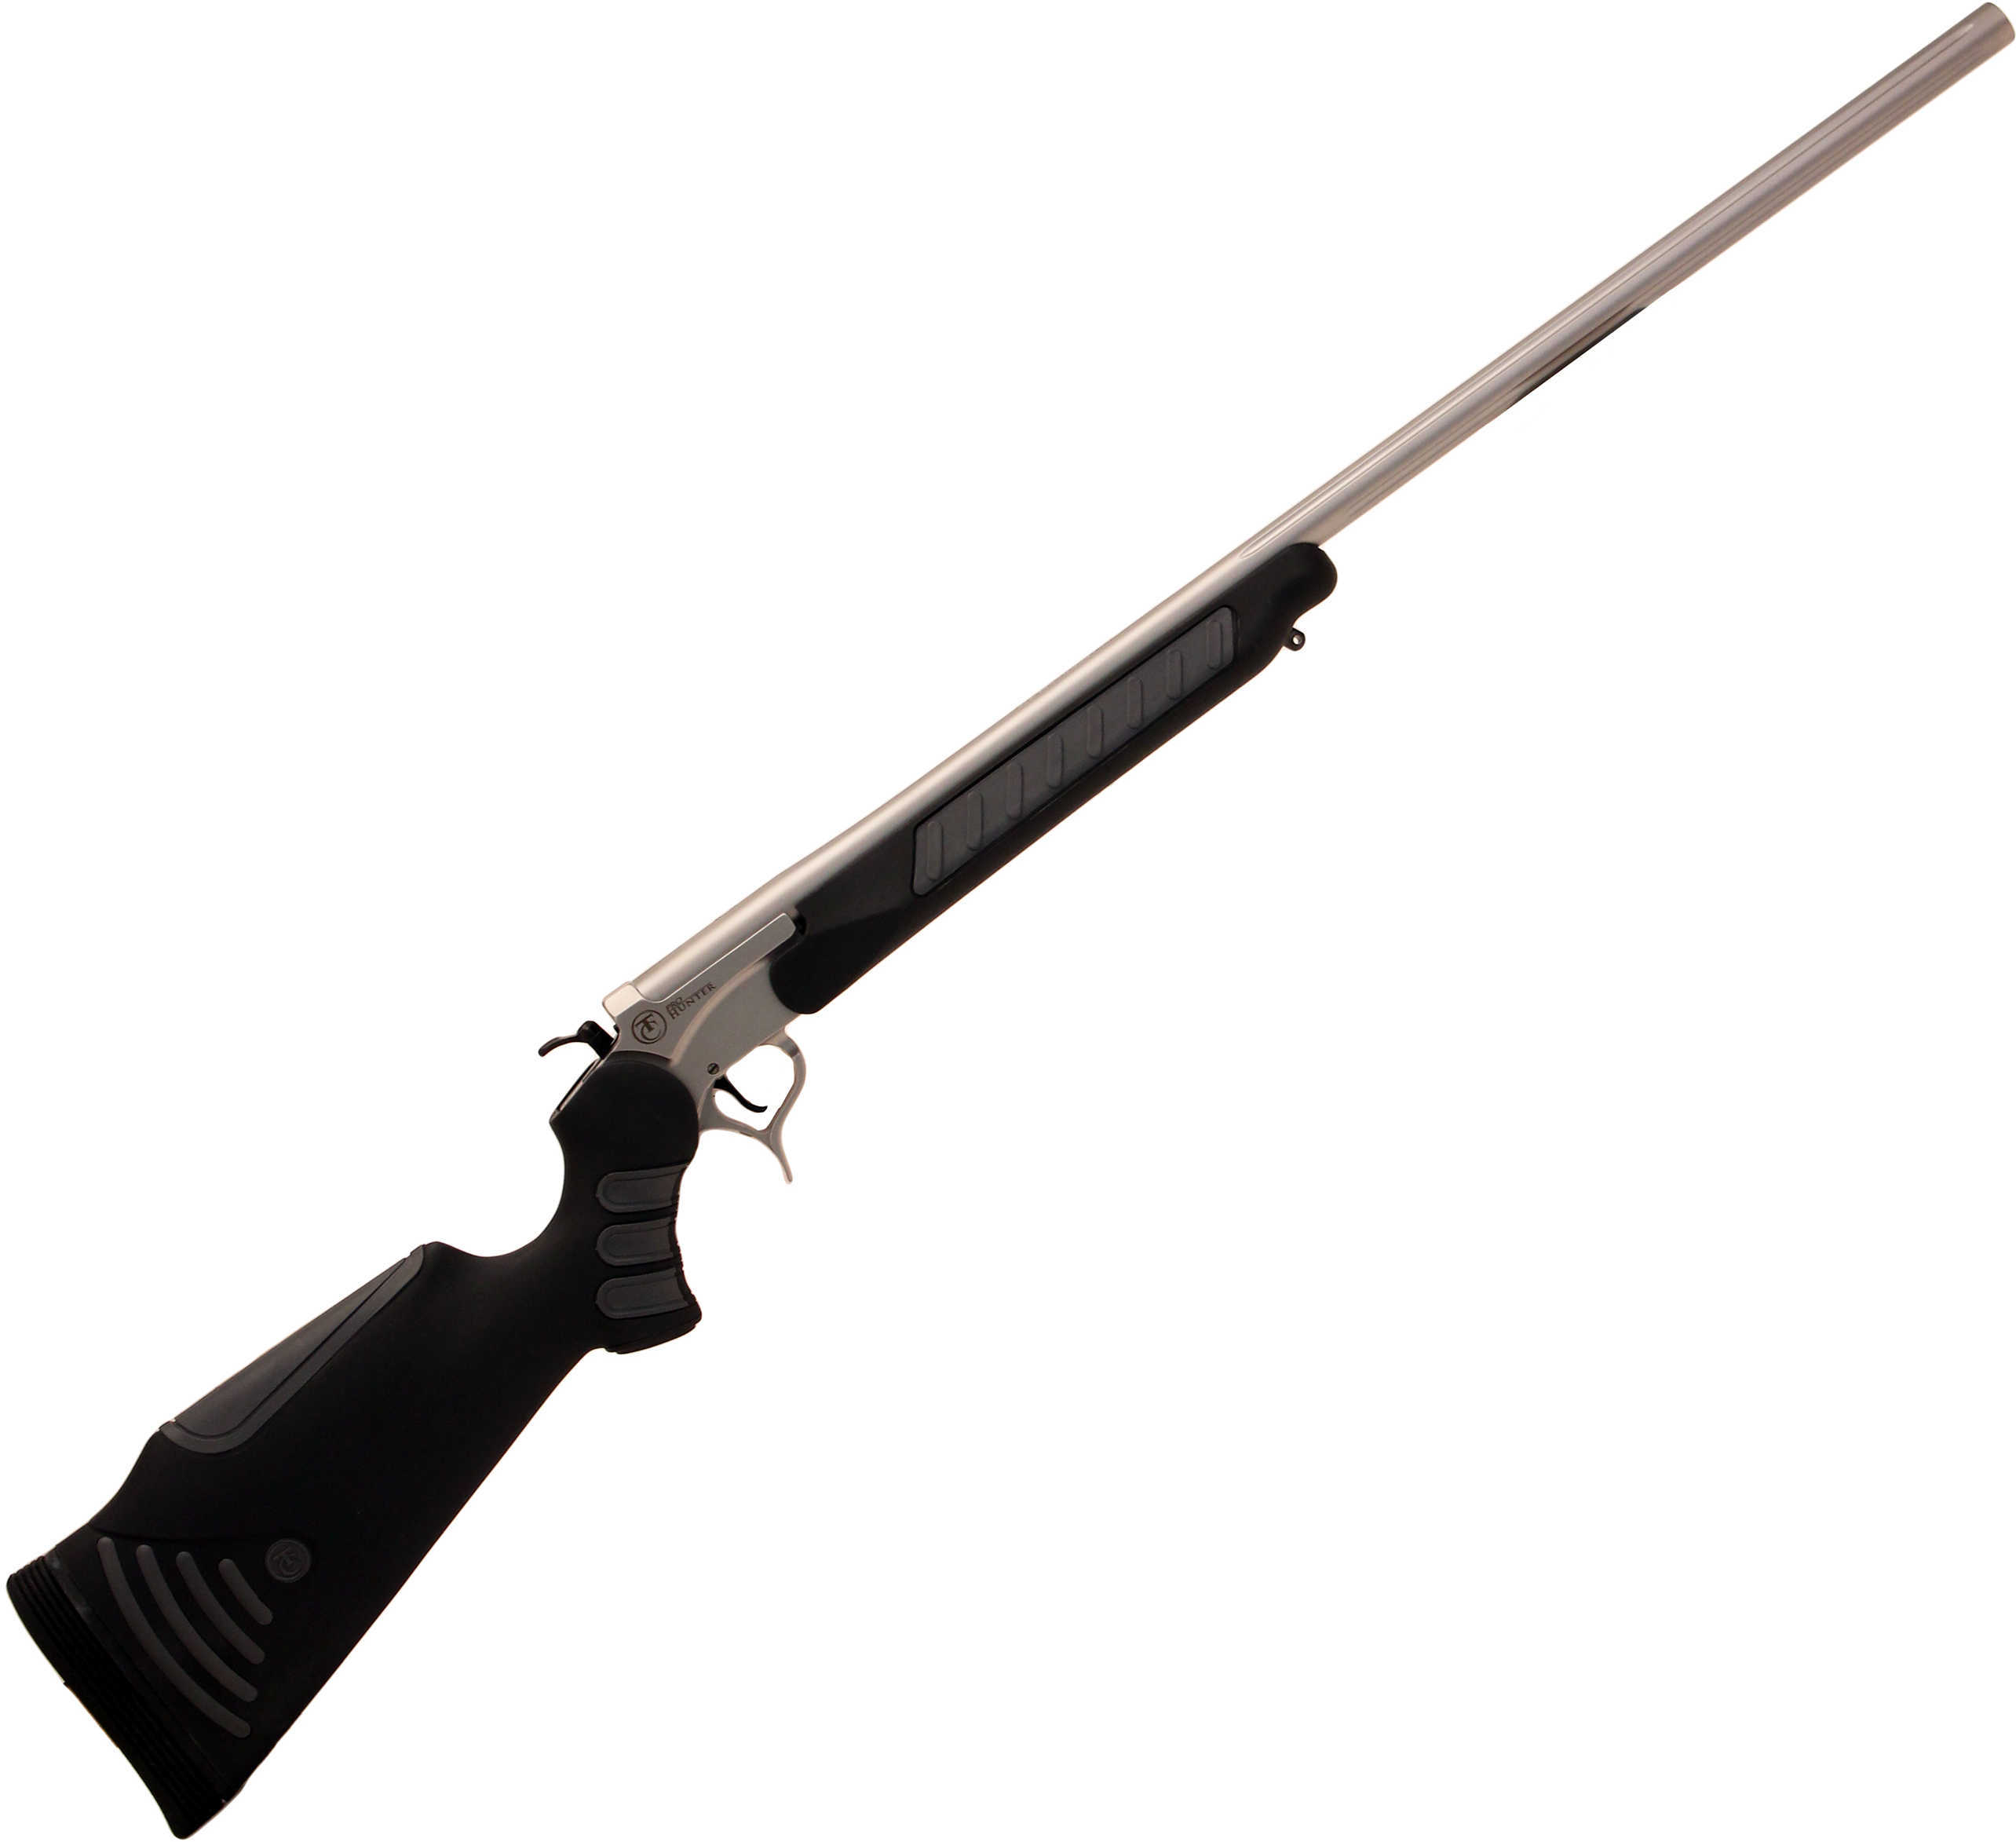 Thompson/Center Arms Rifle Prohunter 243 Win Stainless Steel 28" Barrel Black FlexTech Stock Bolt Action